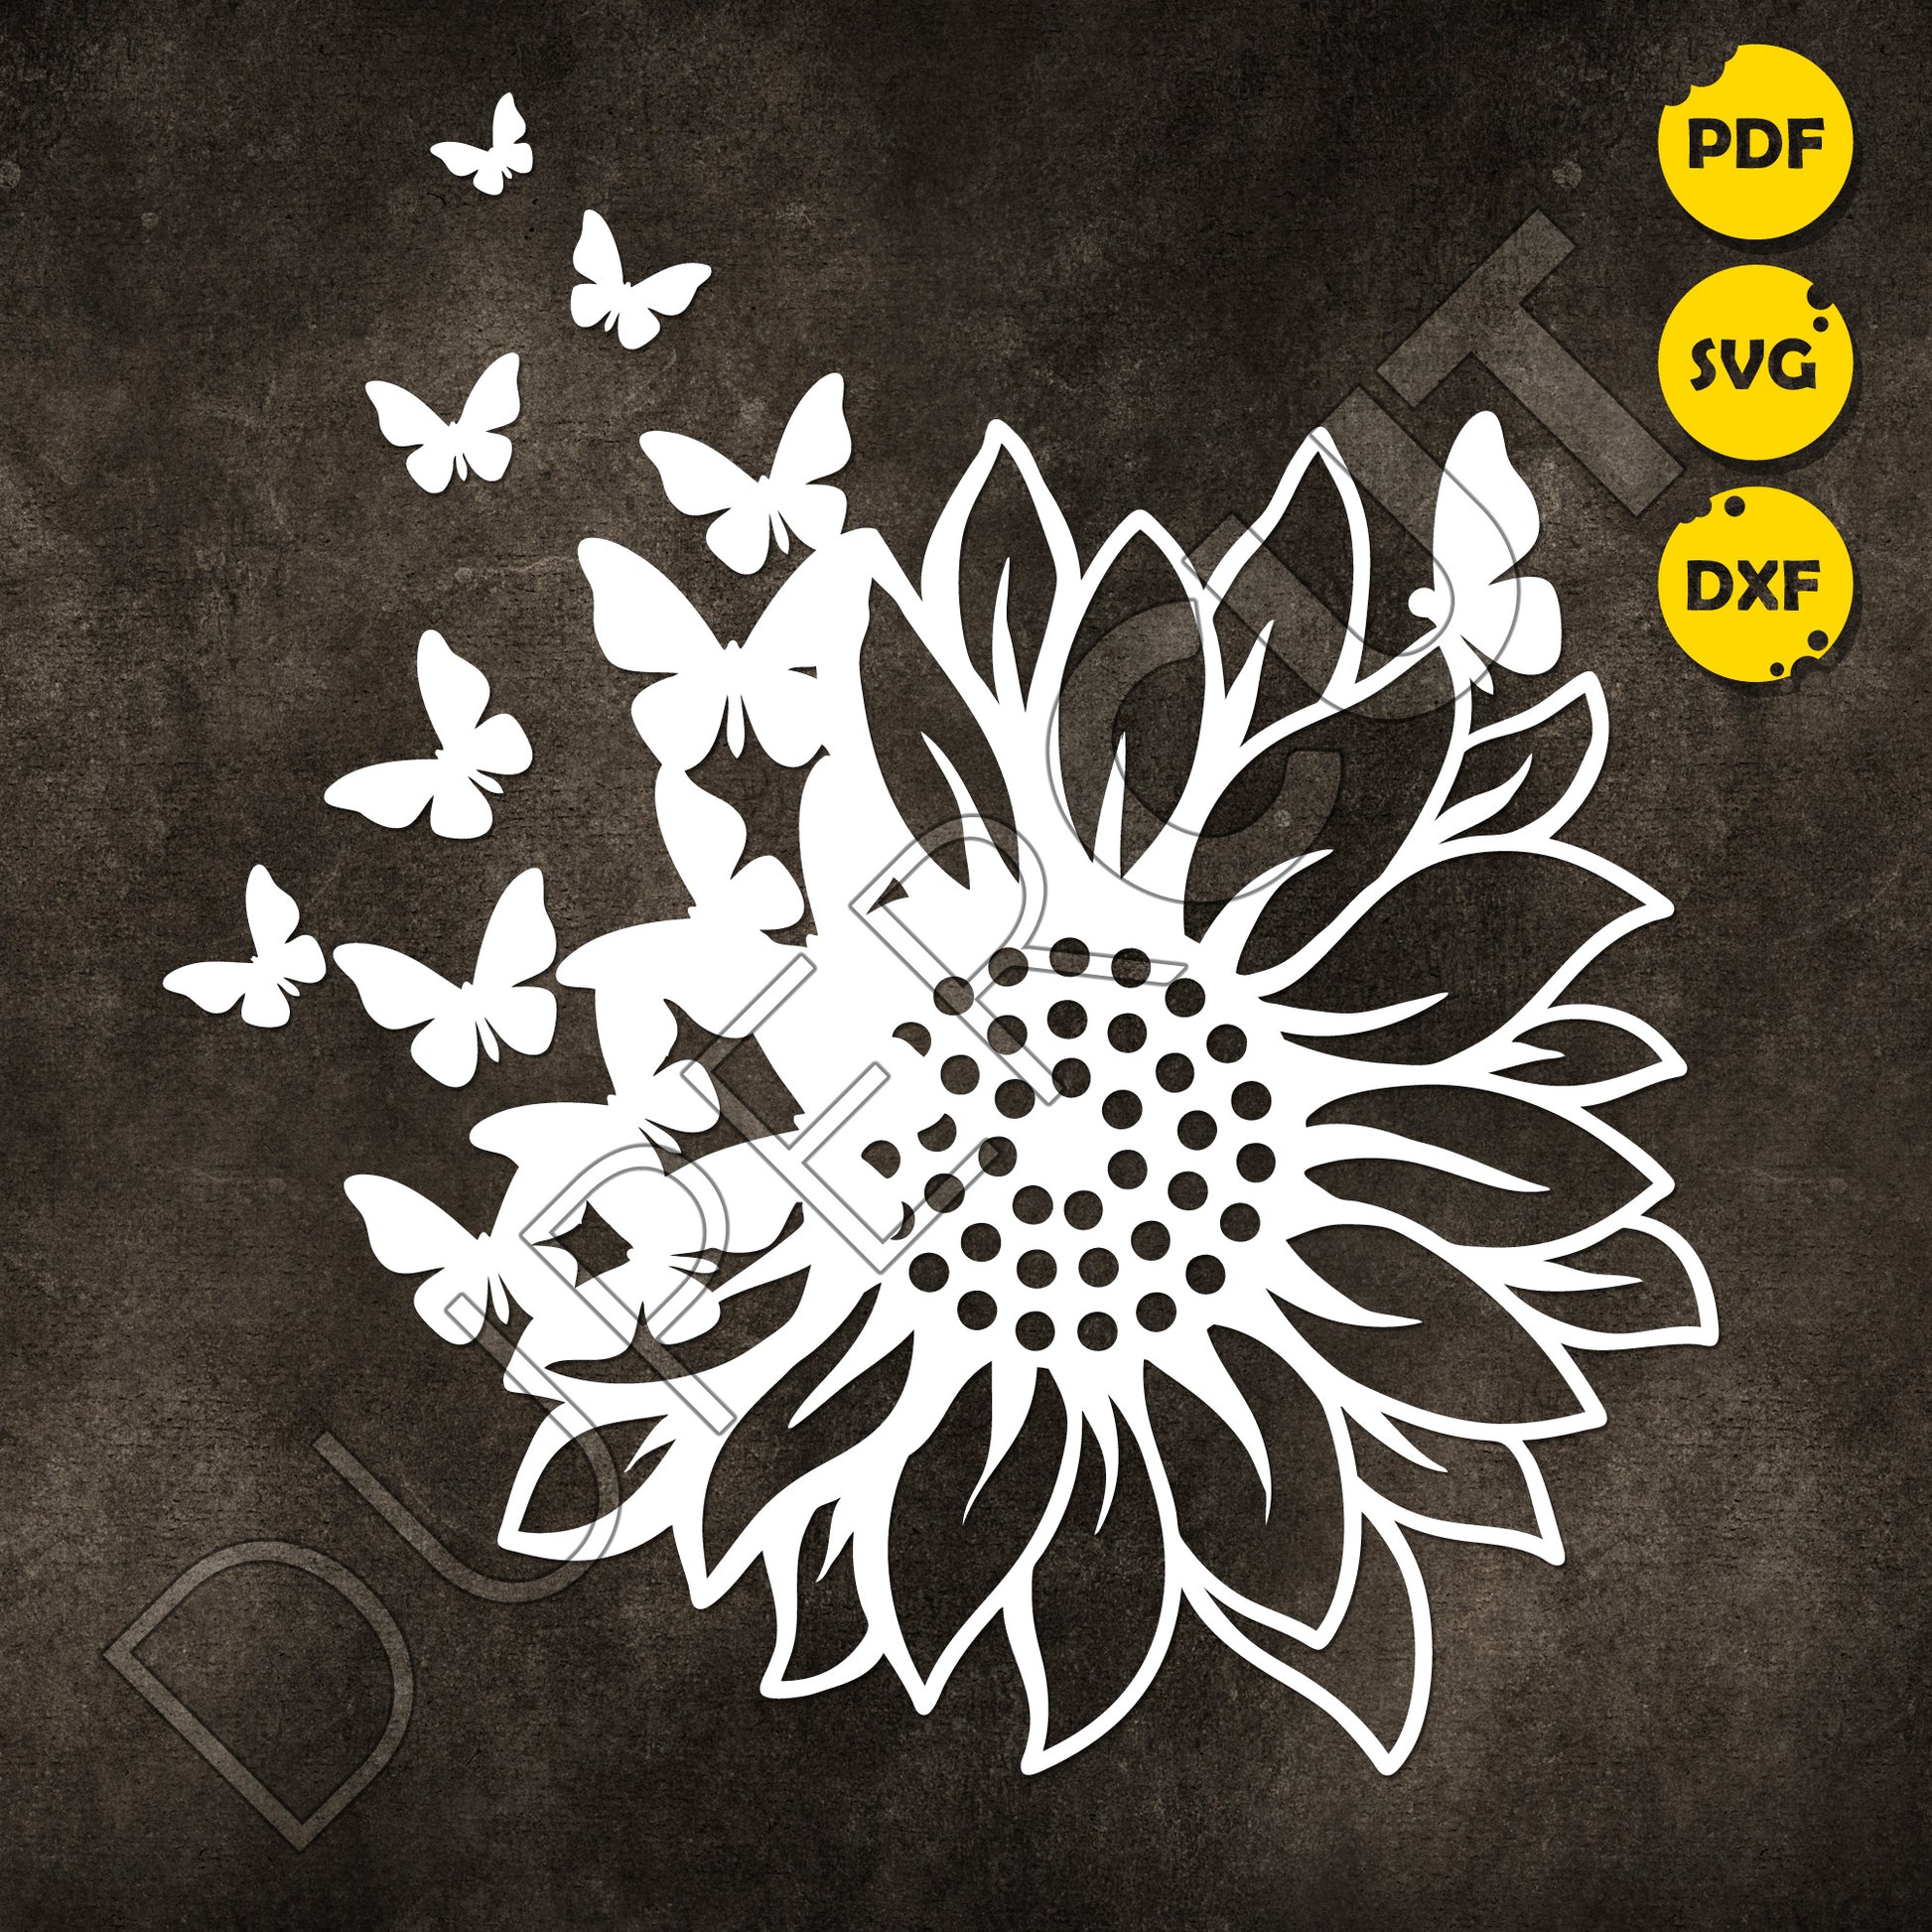 Sunflower with butterflies, vinyl cutting  template - SVG DXF PNG files for Cricut, Glowforge, Silhouette Cameo, CNC Machines